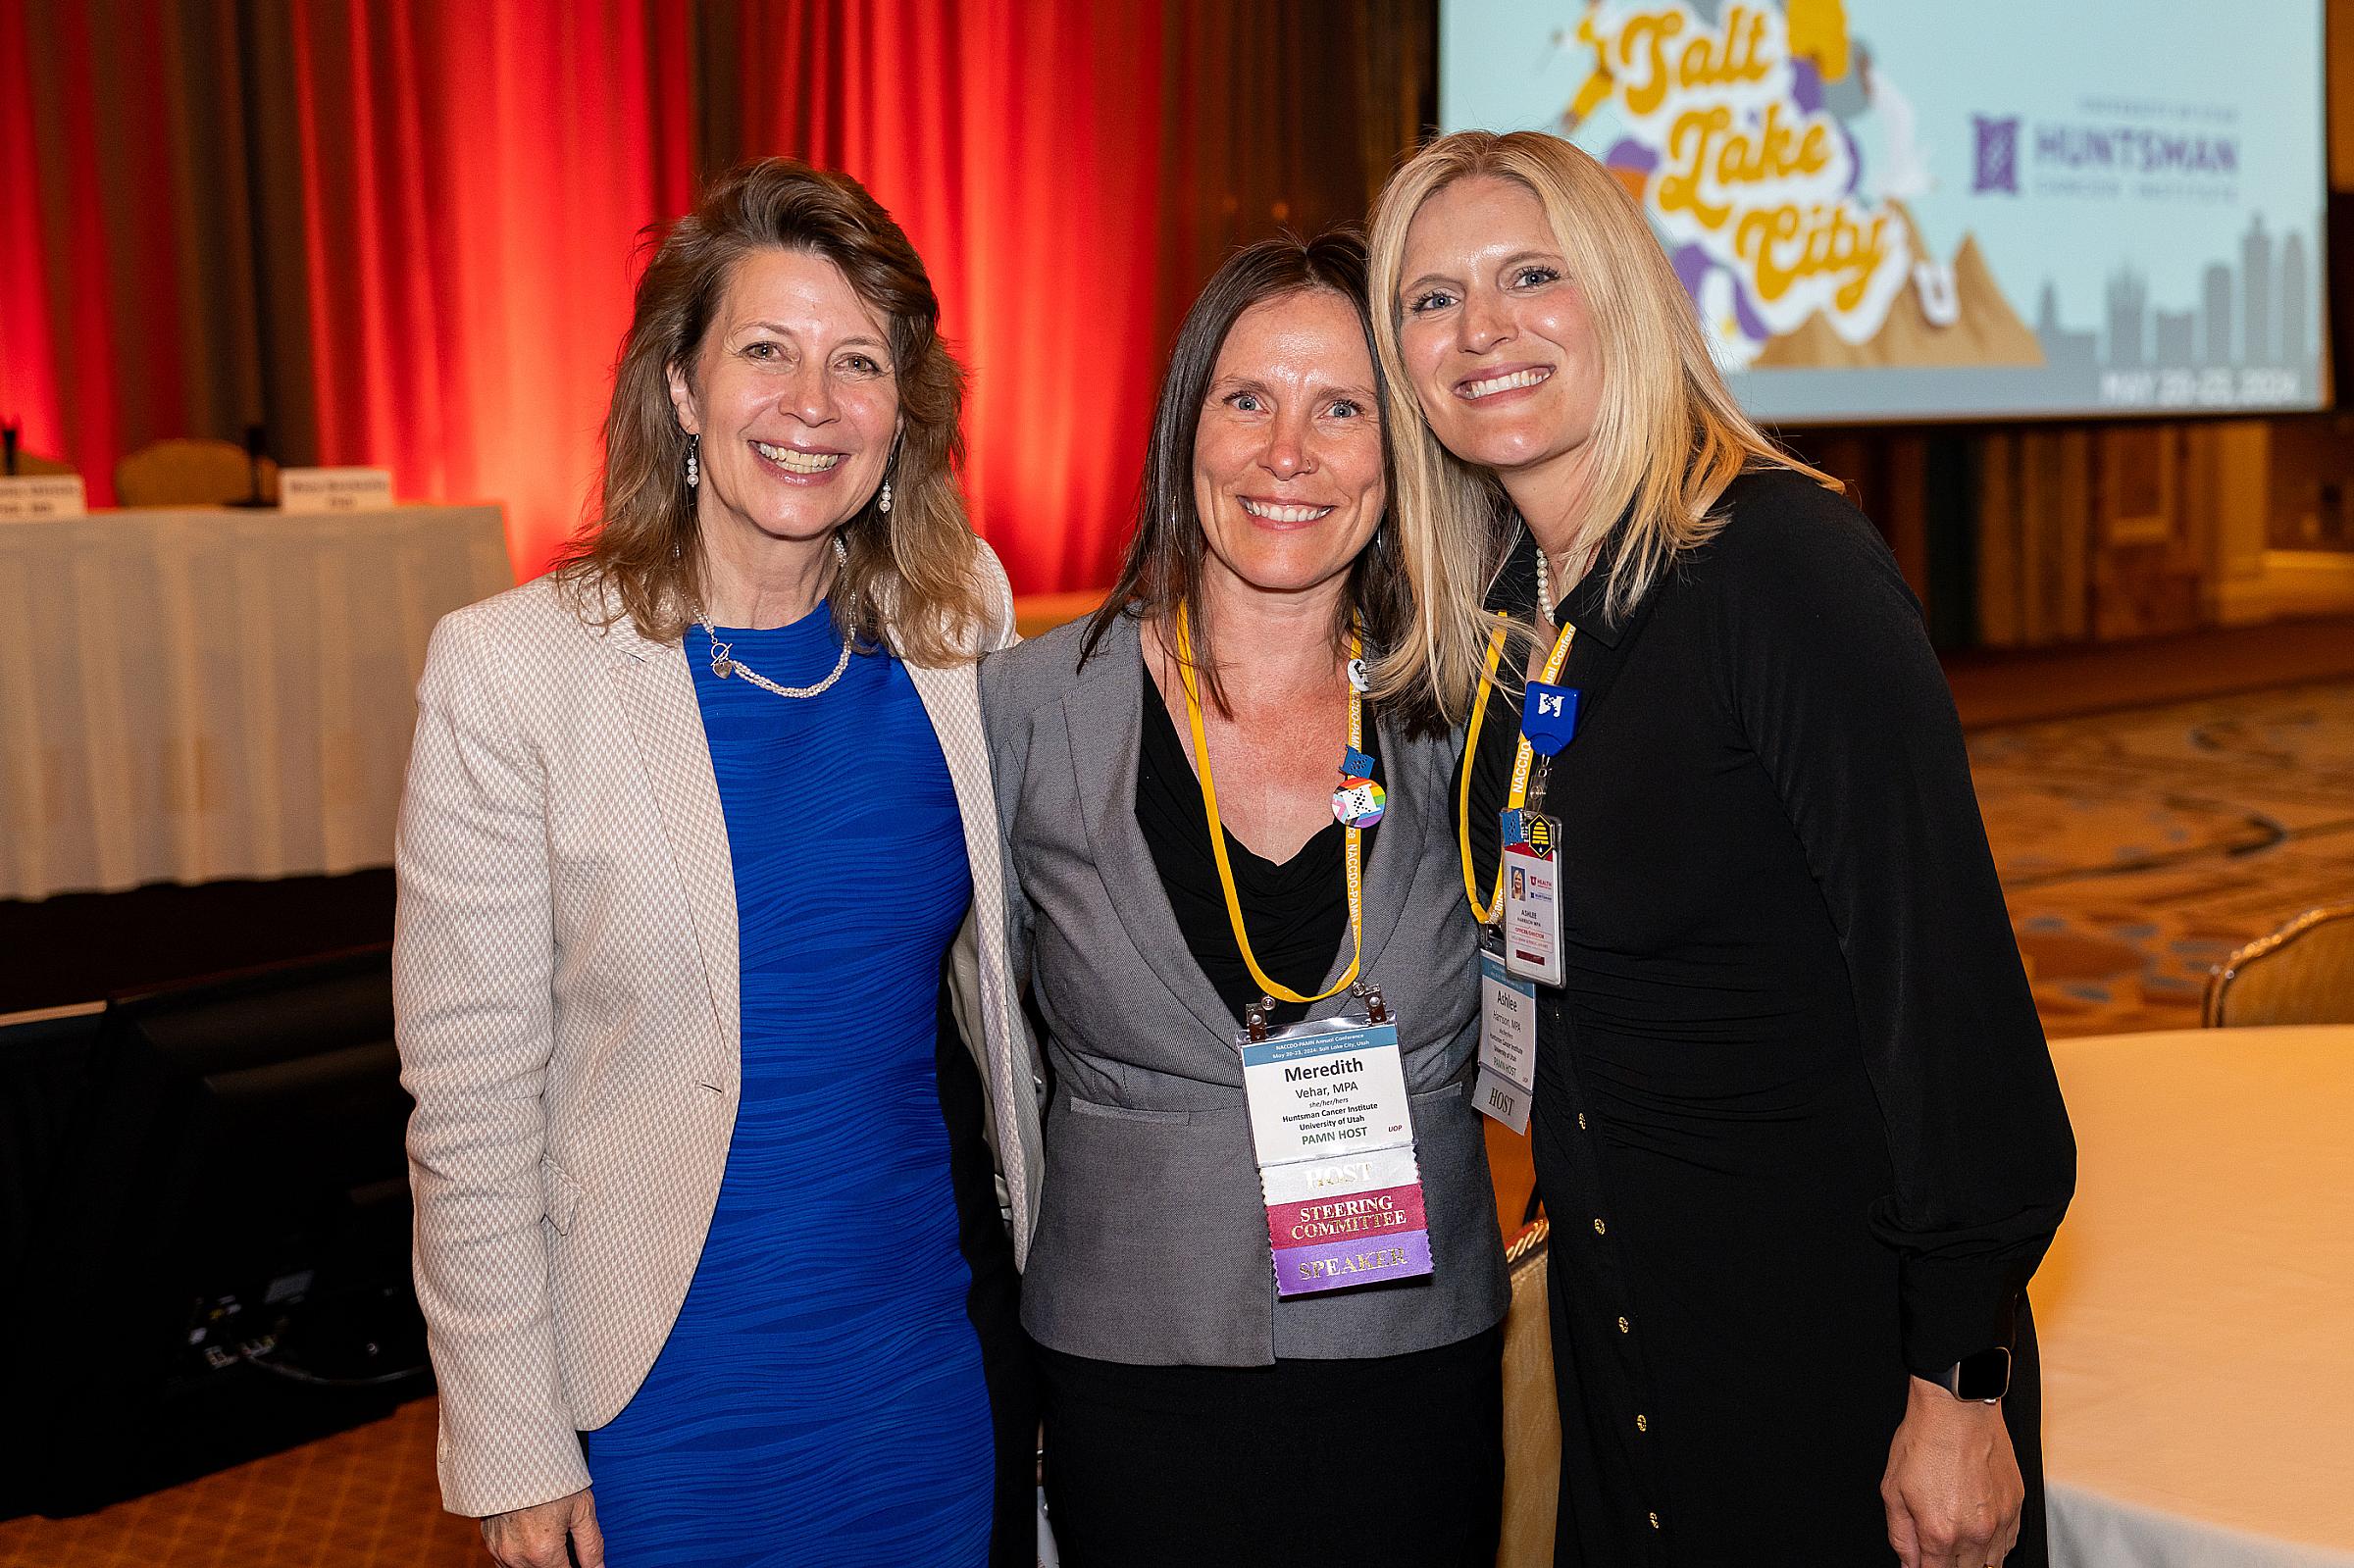 (Left to right) Neli Ulrich, PhD, MS, Meredith Vehar, and Ashlee Harrison